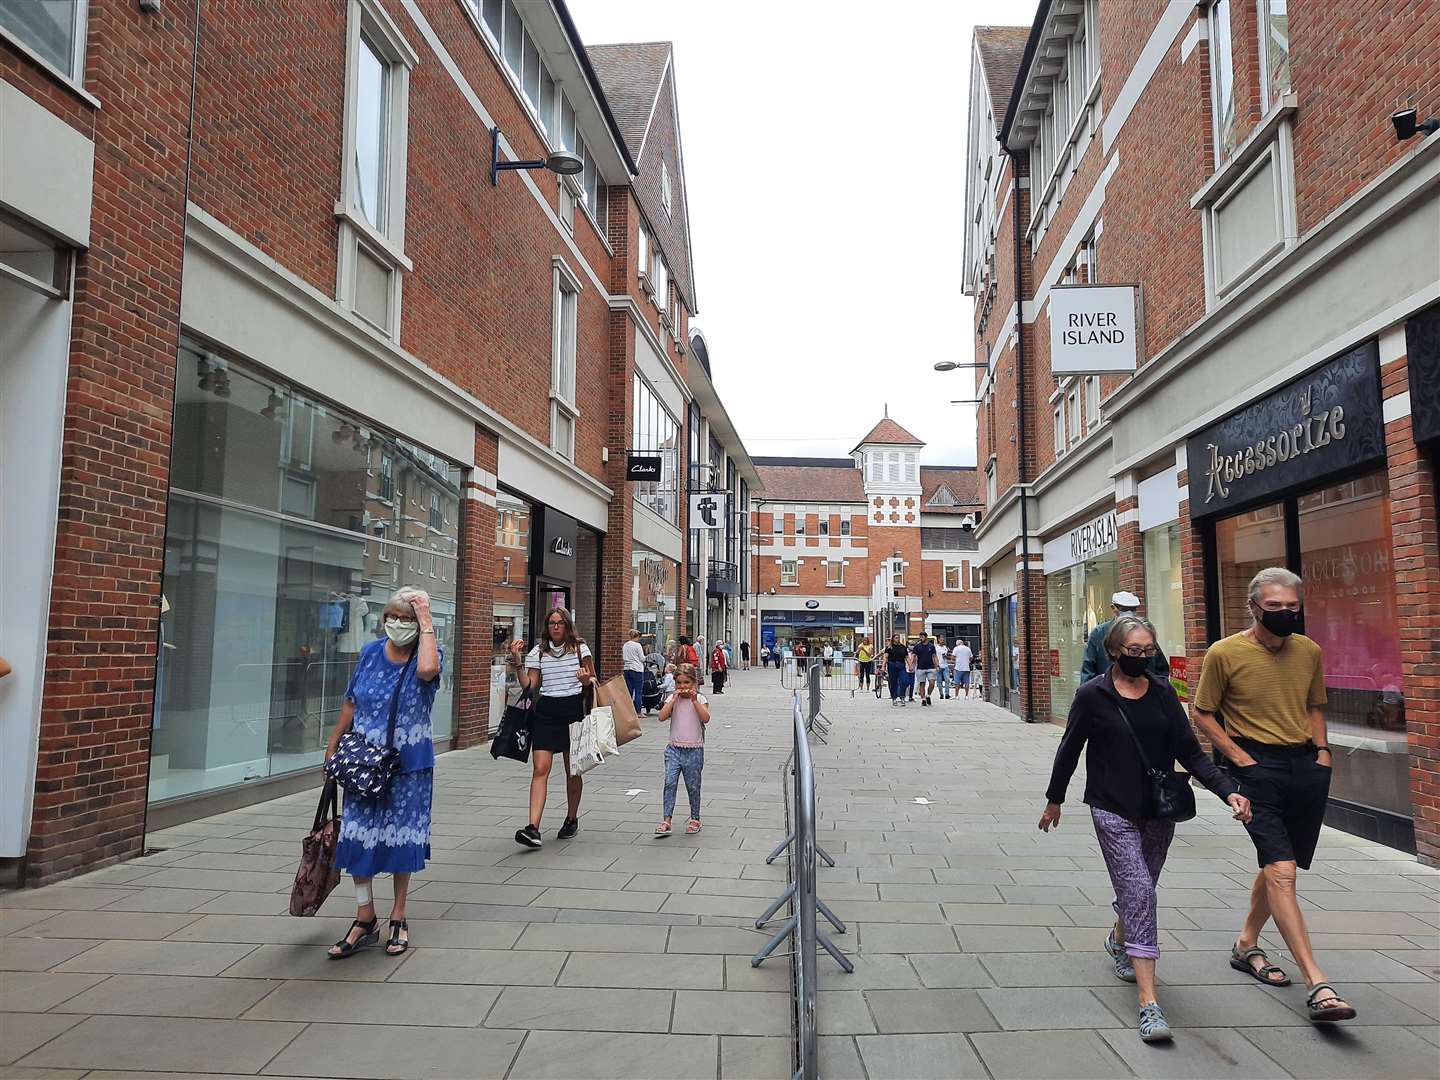 View of Whitefriars in Canterbury on the day face coverings became mandatory